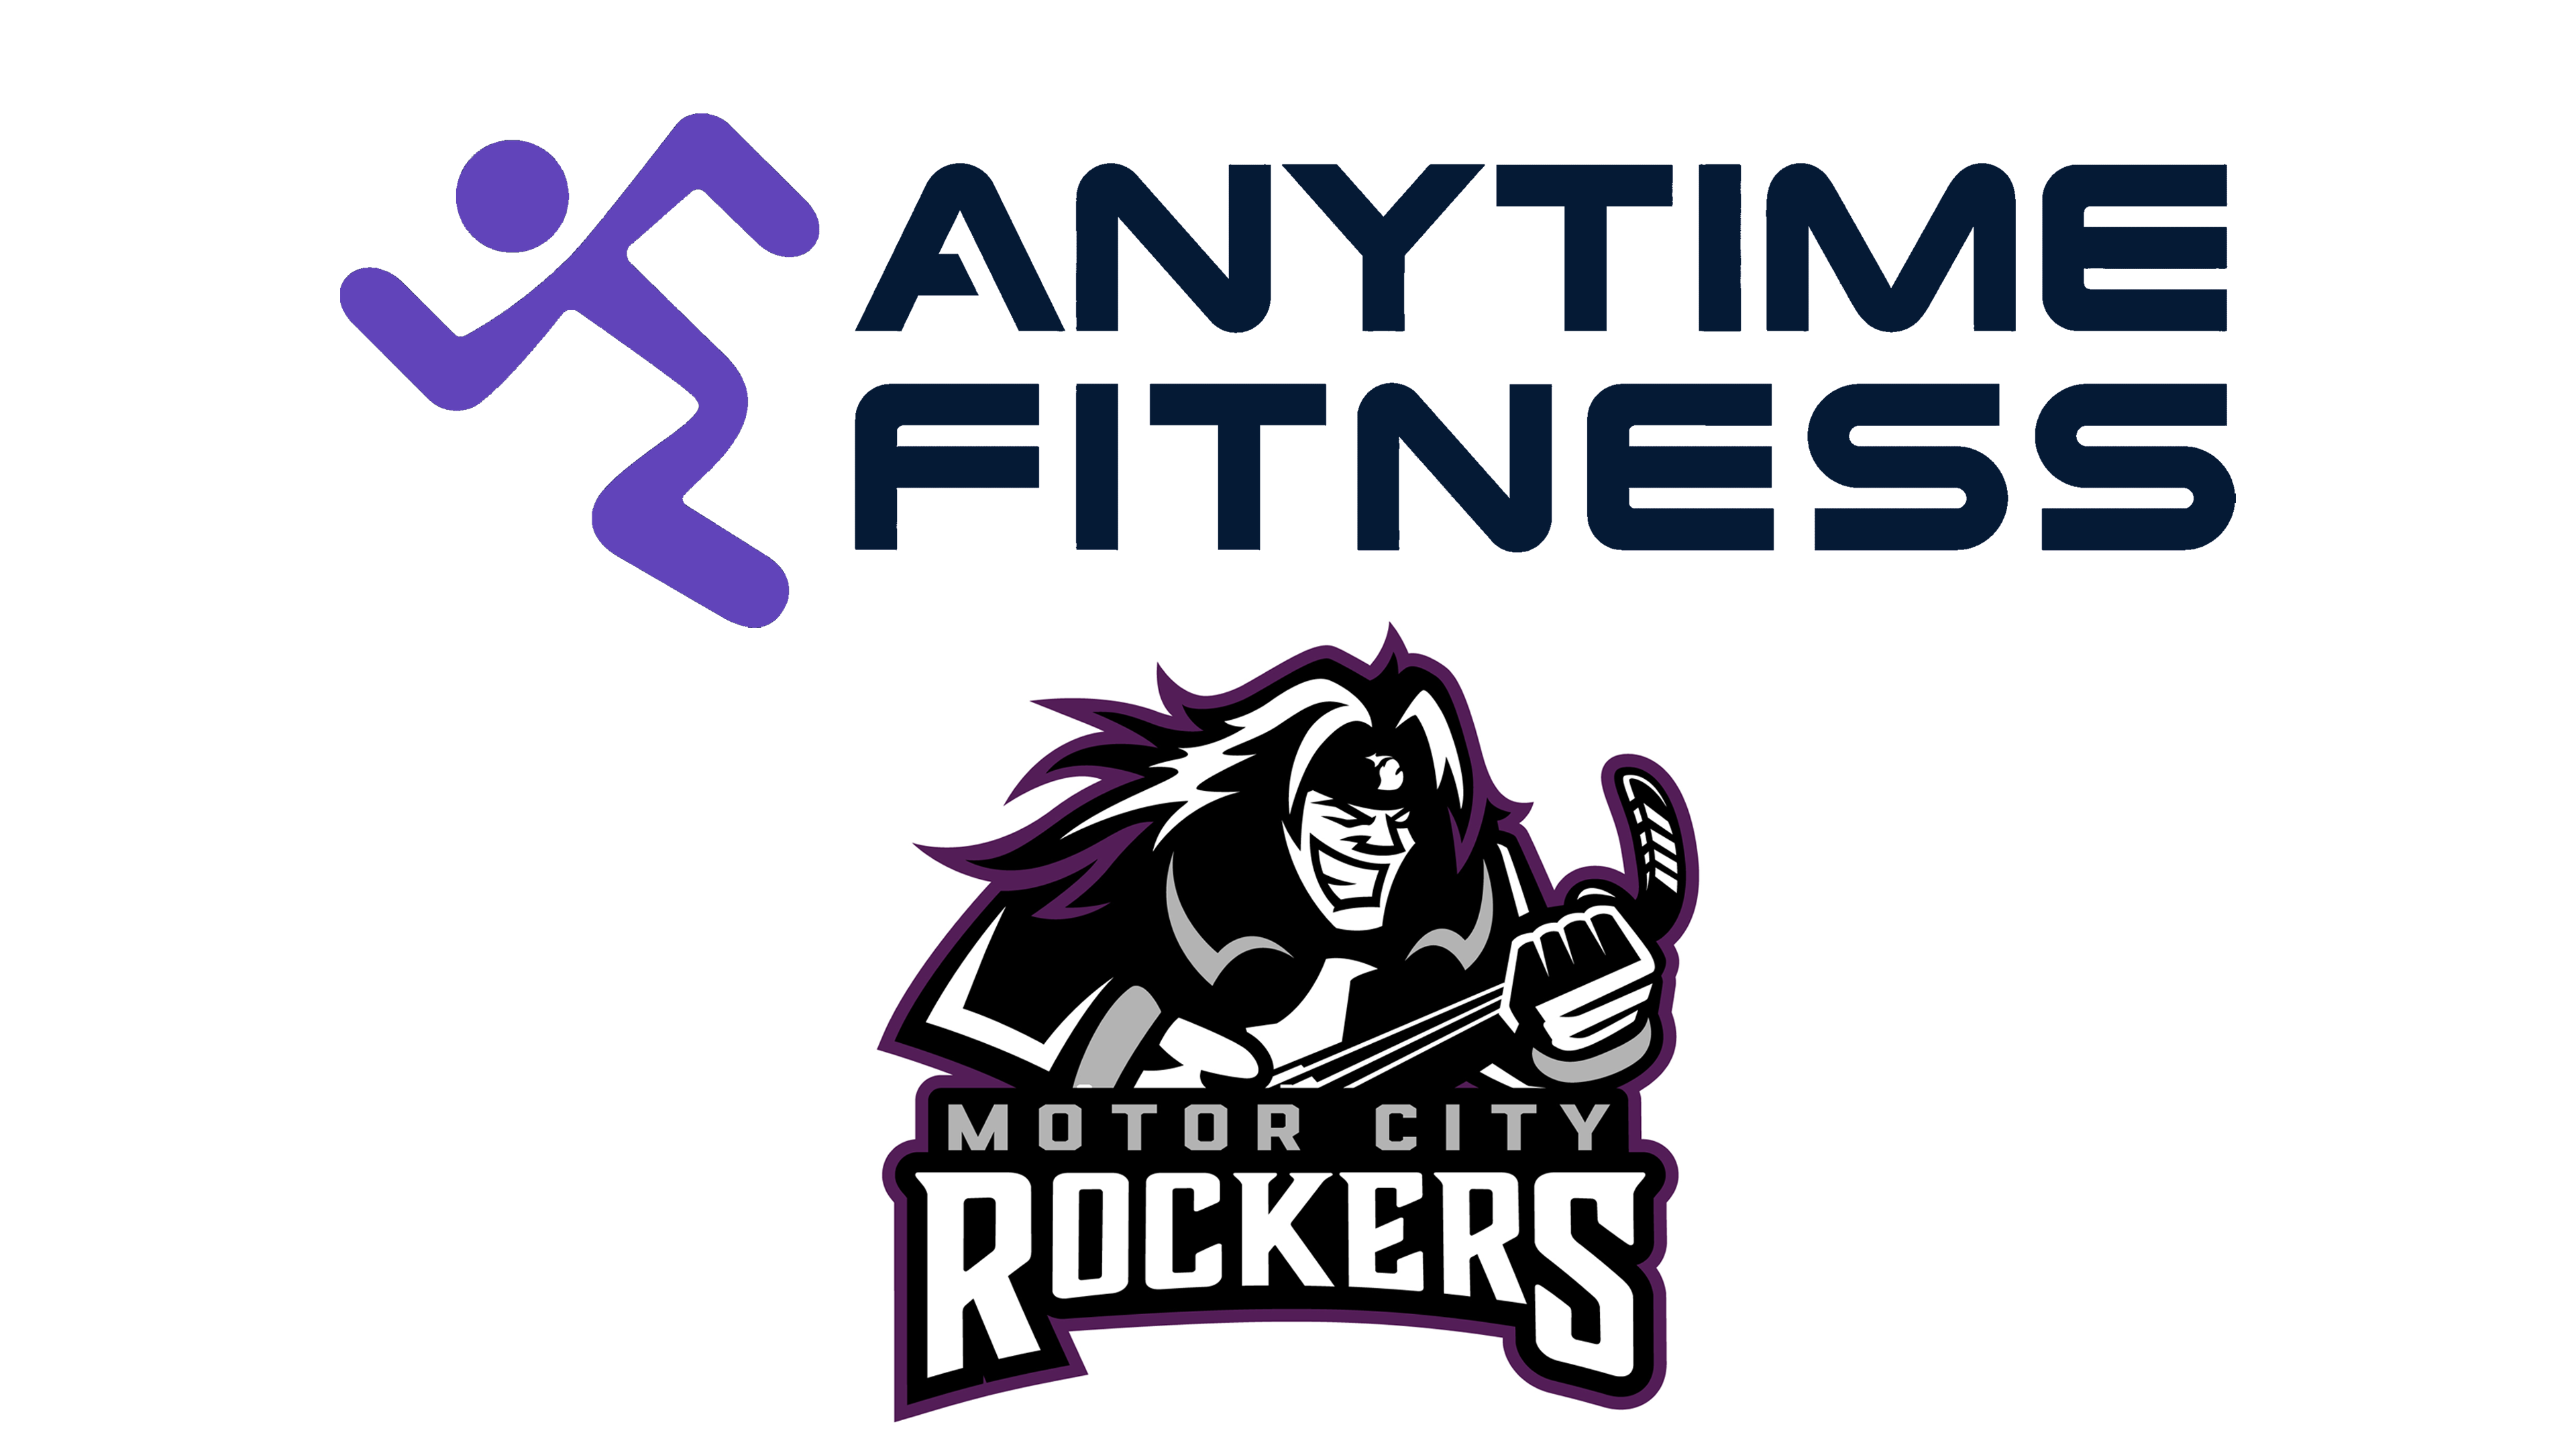 2023 Motor City Rockers and Anytime Fitness Virtual Food Drive